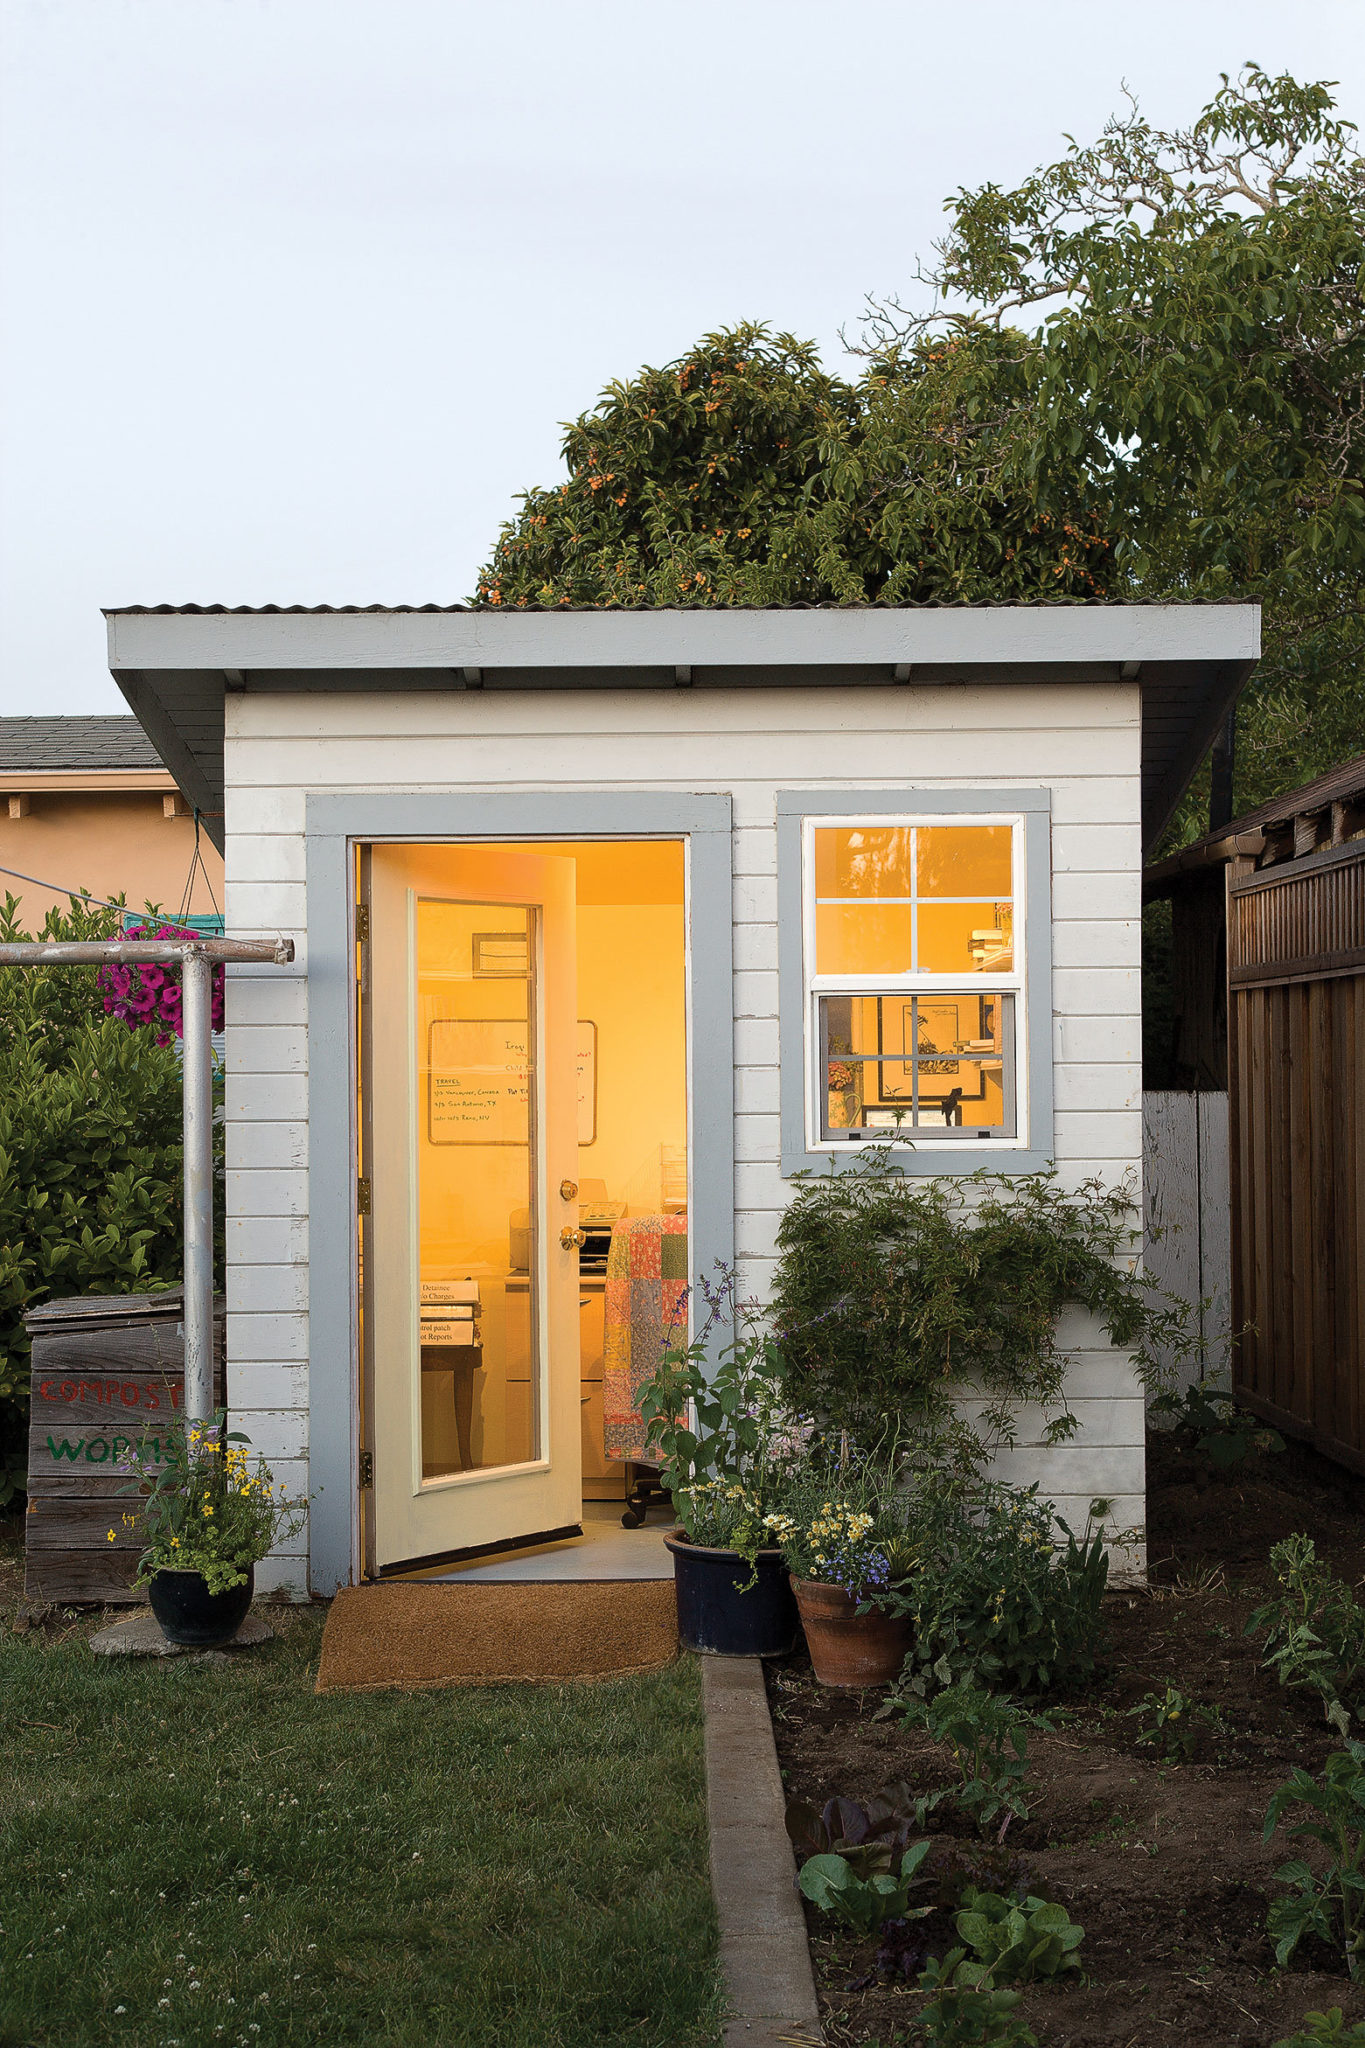 White and gray modern garden shed